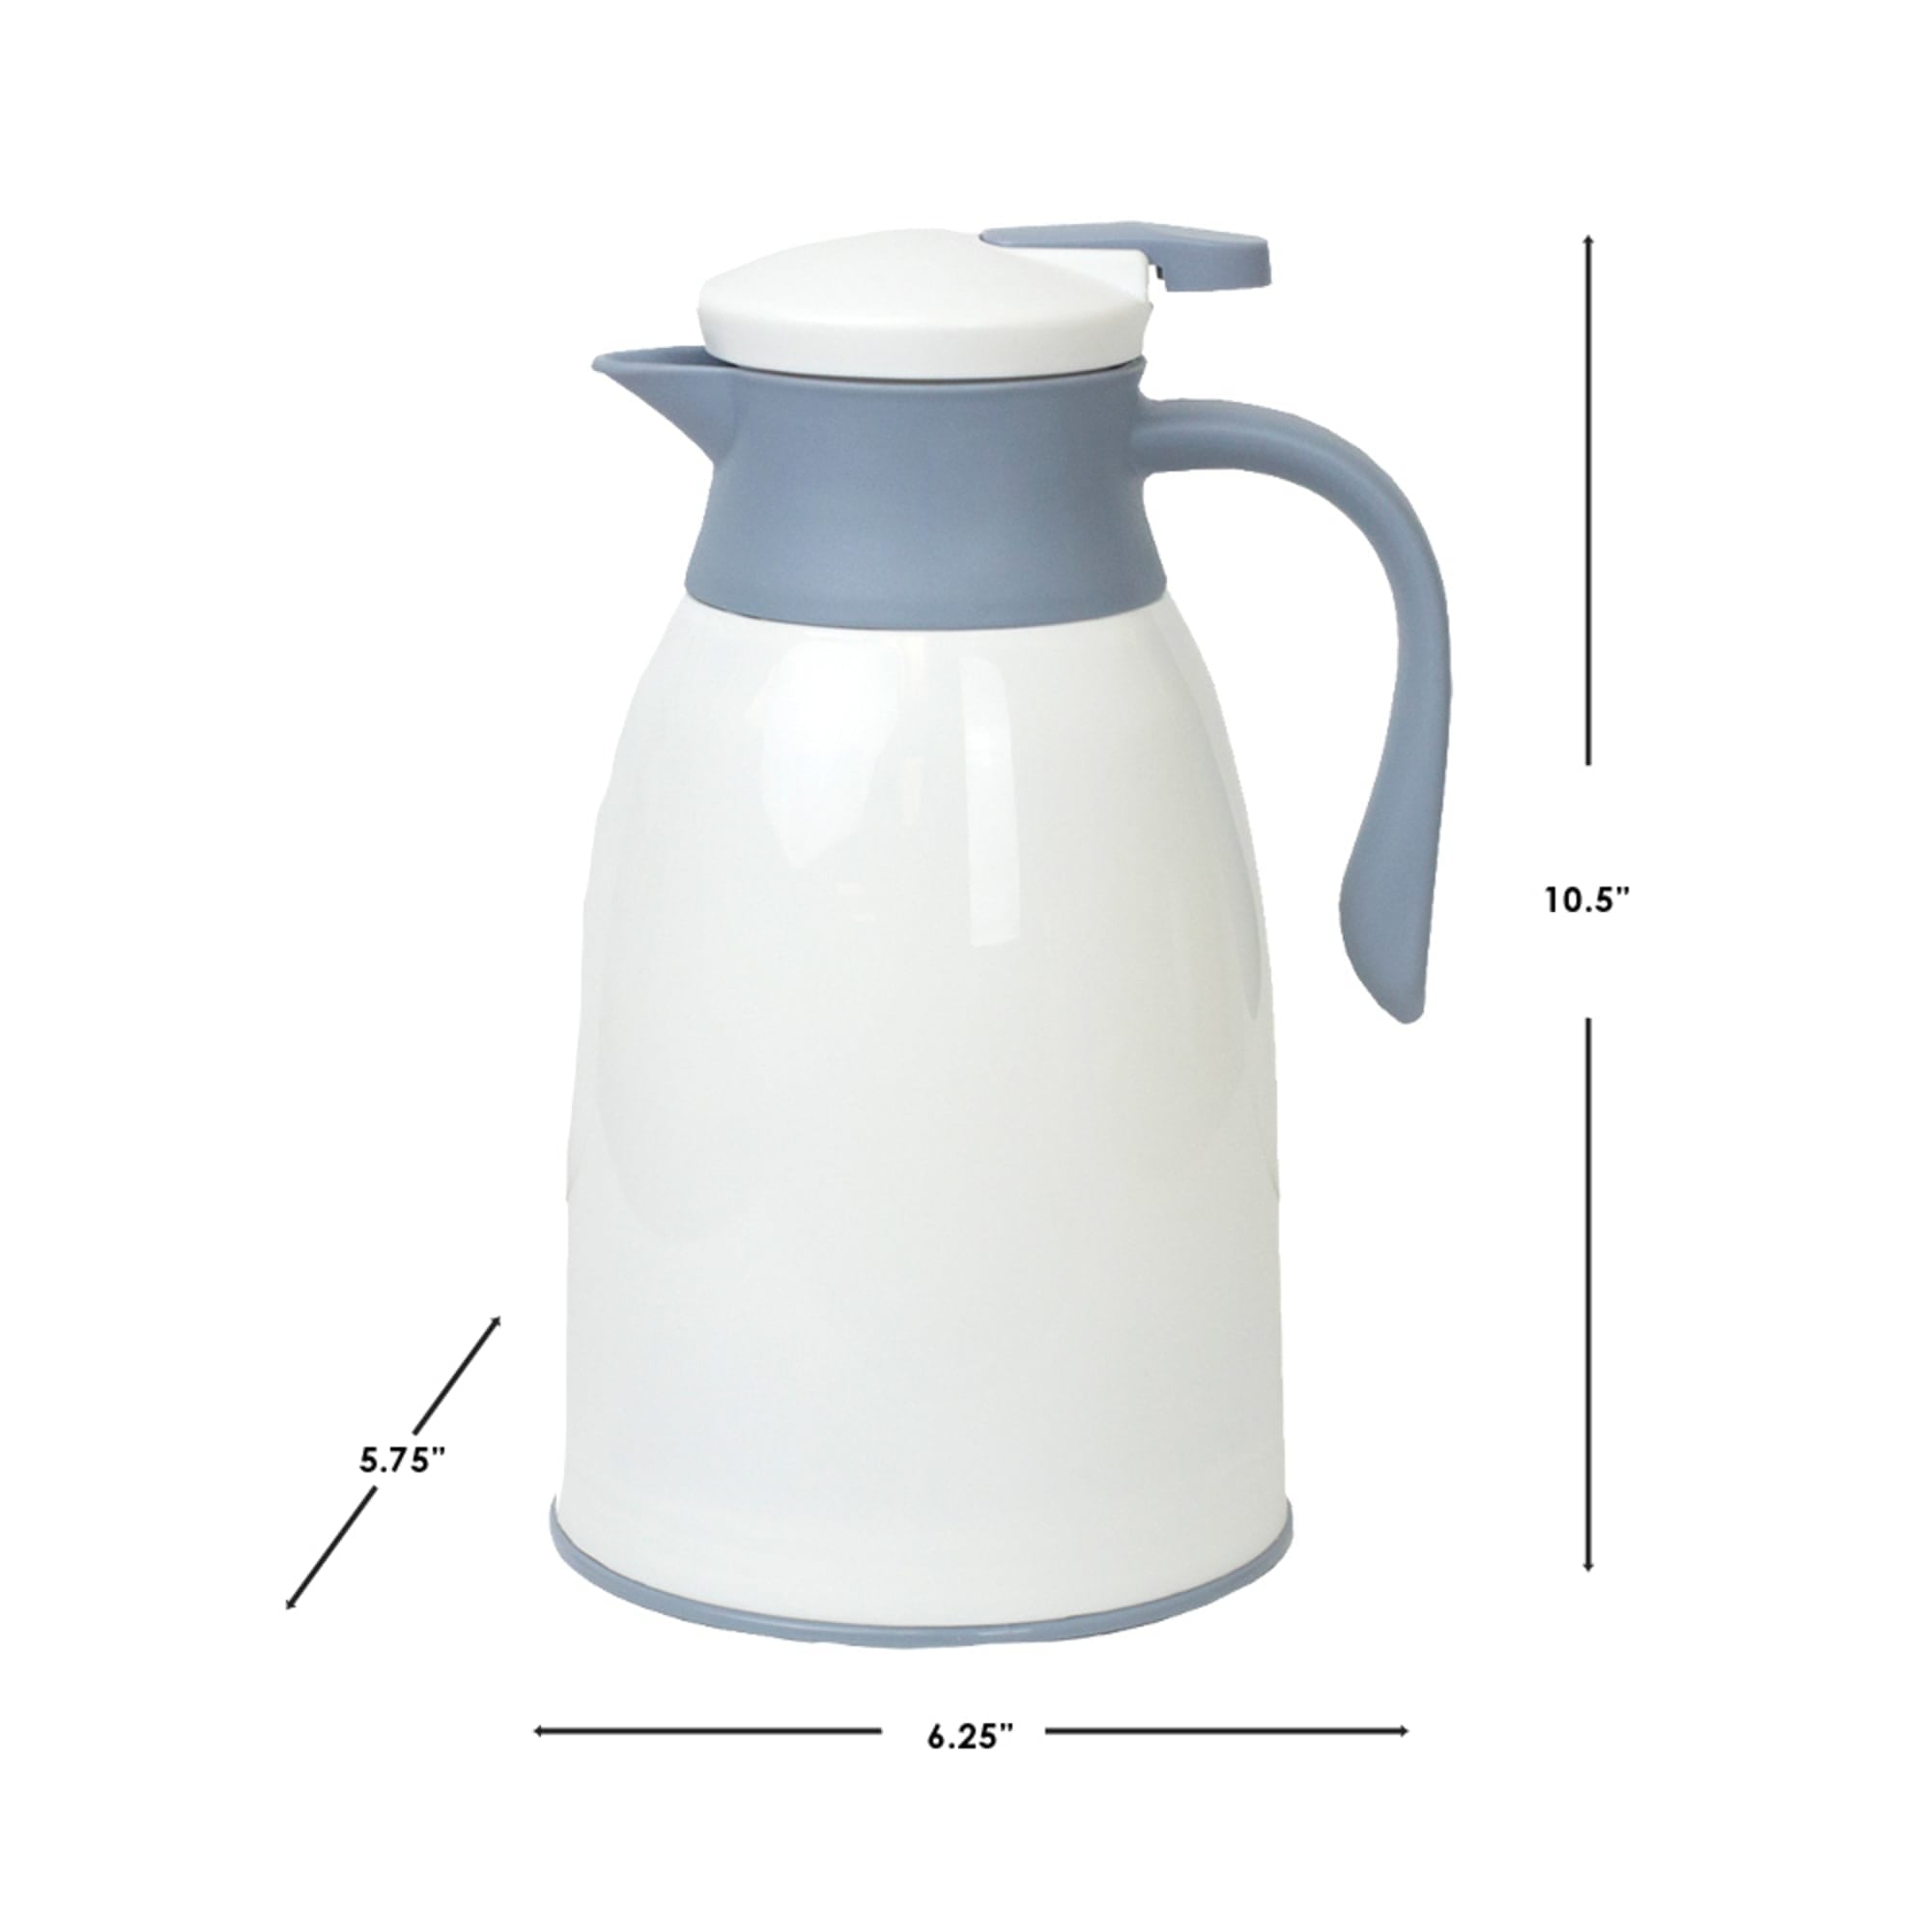 Home Basics 1 Liter Insulated Plastic Carafe, White $7.00 EACH, CASE PACK OF 12